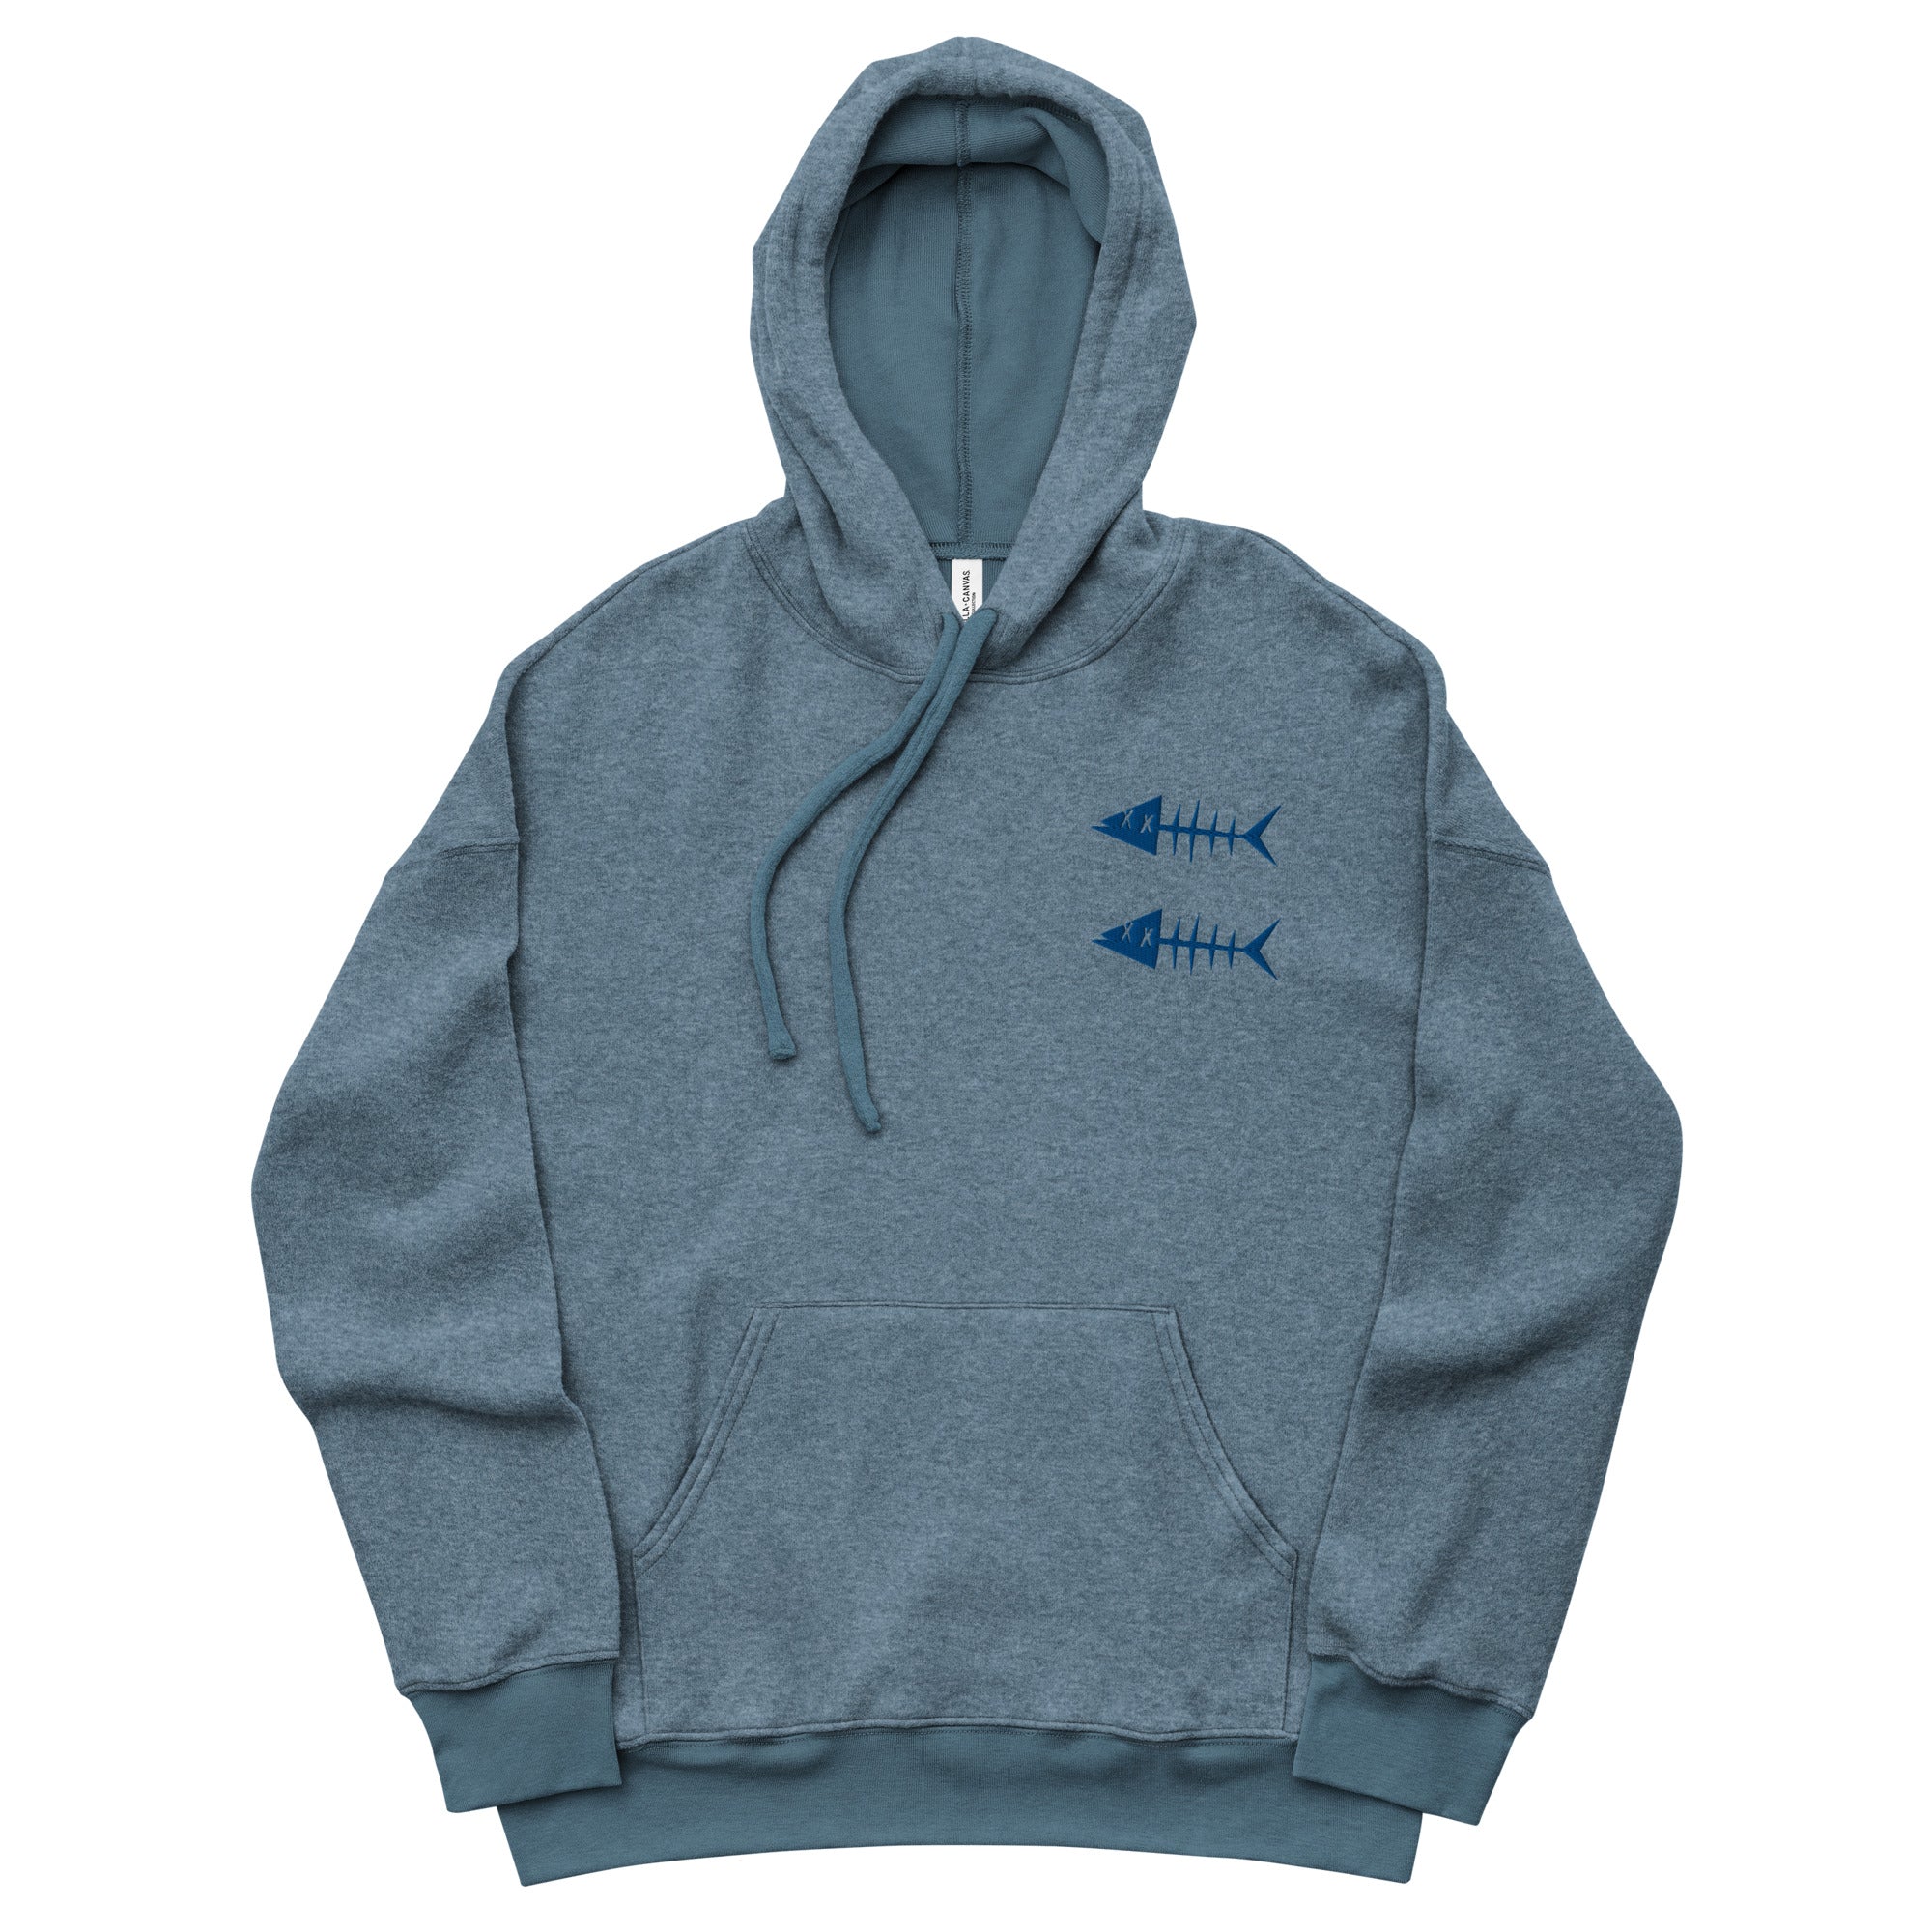 Clishirt© Embroidered Royal Fish Unisex heather slate sueded fleece hoodie